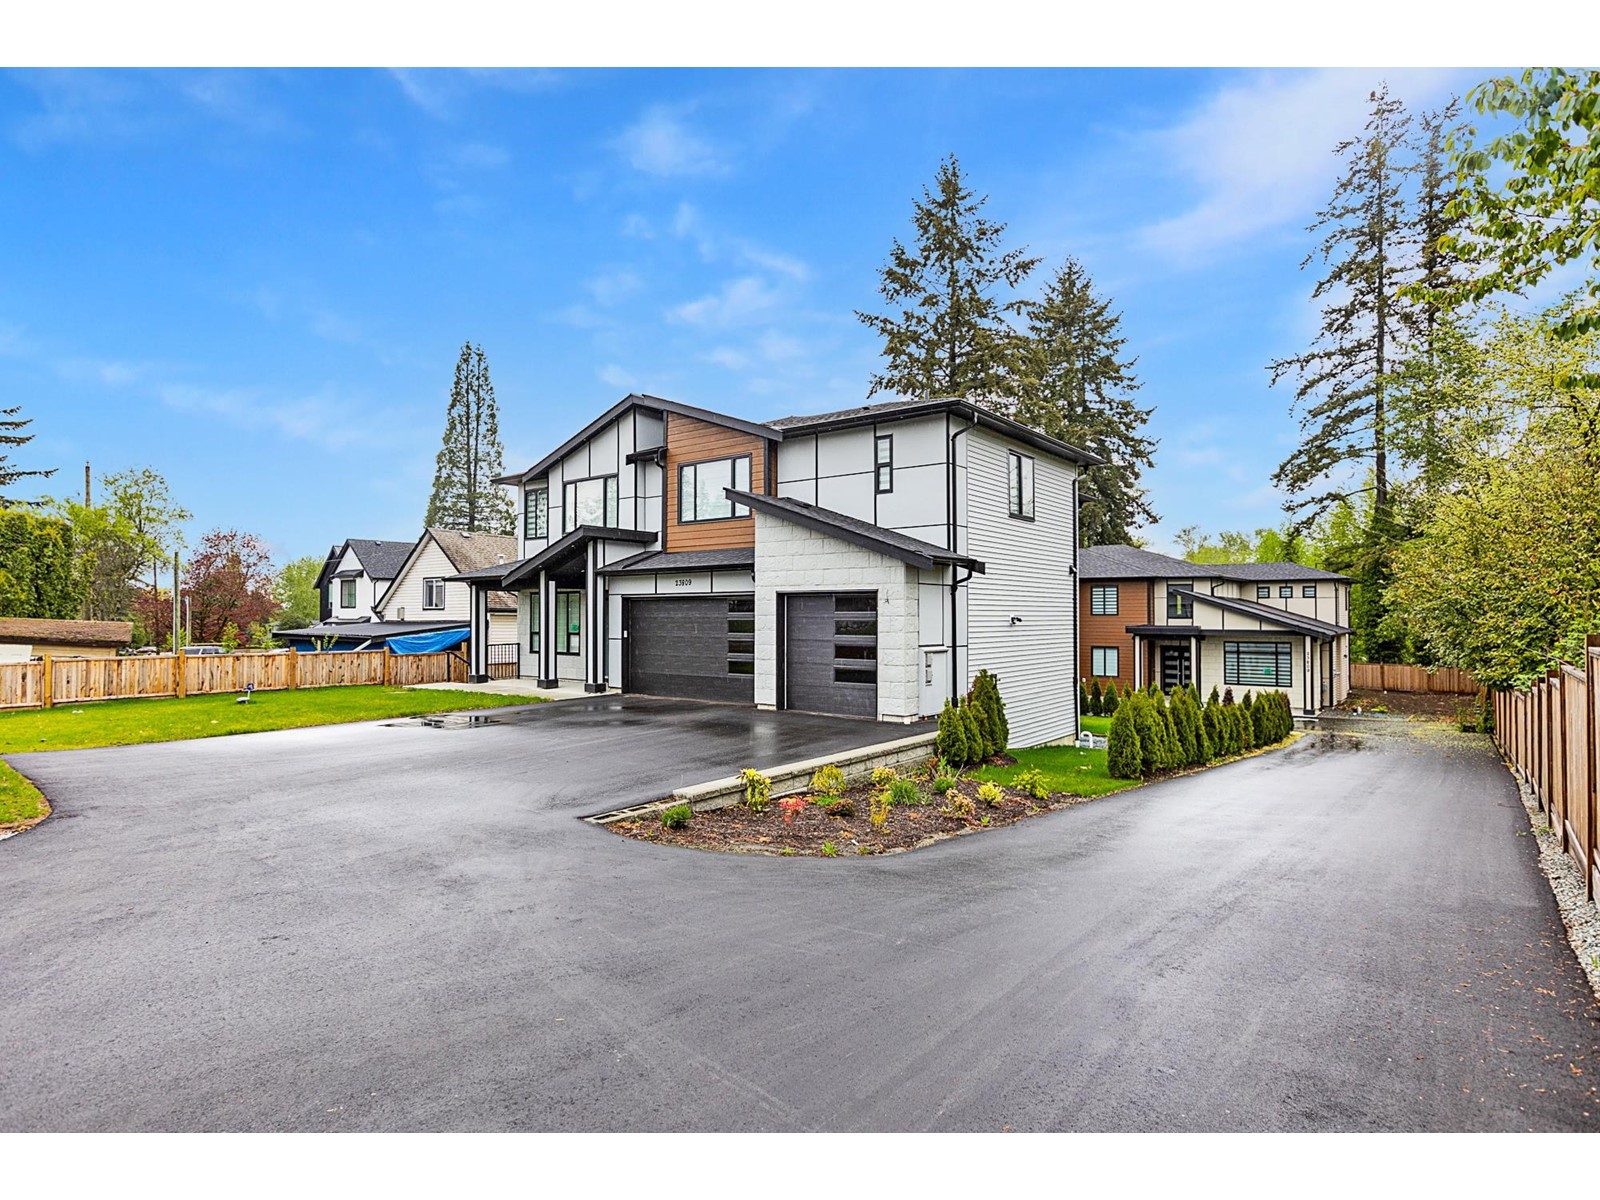 1 23809 OLD YALE ROAD, Langley